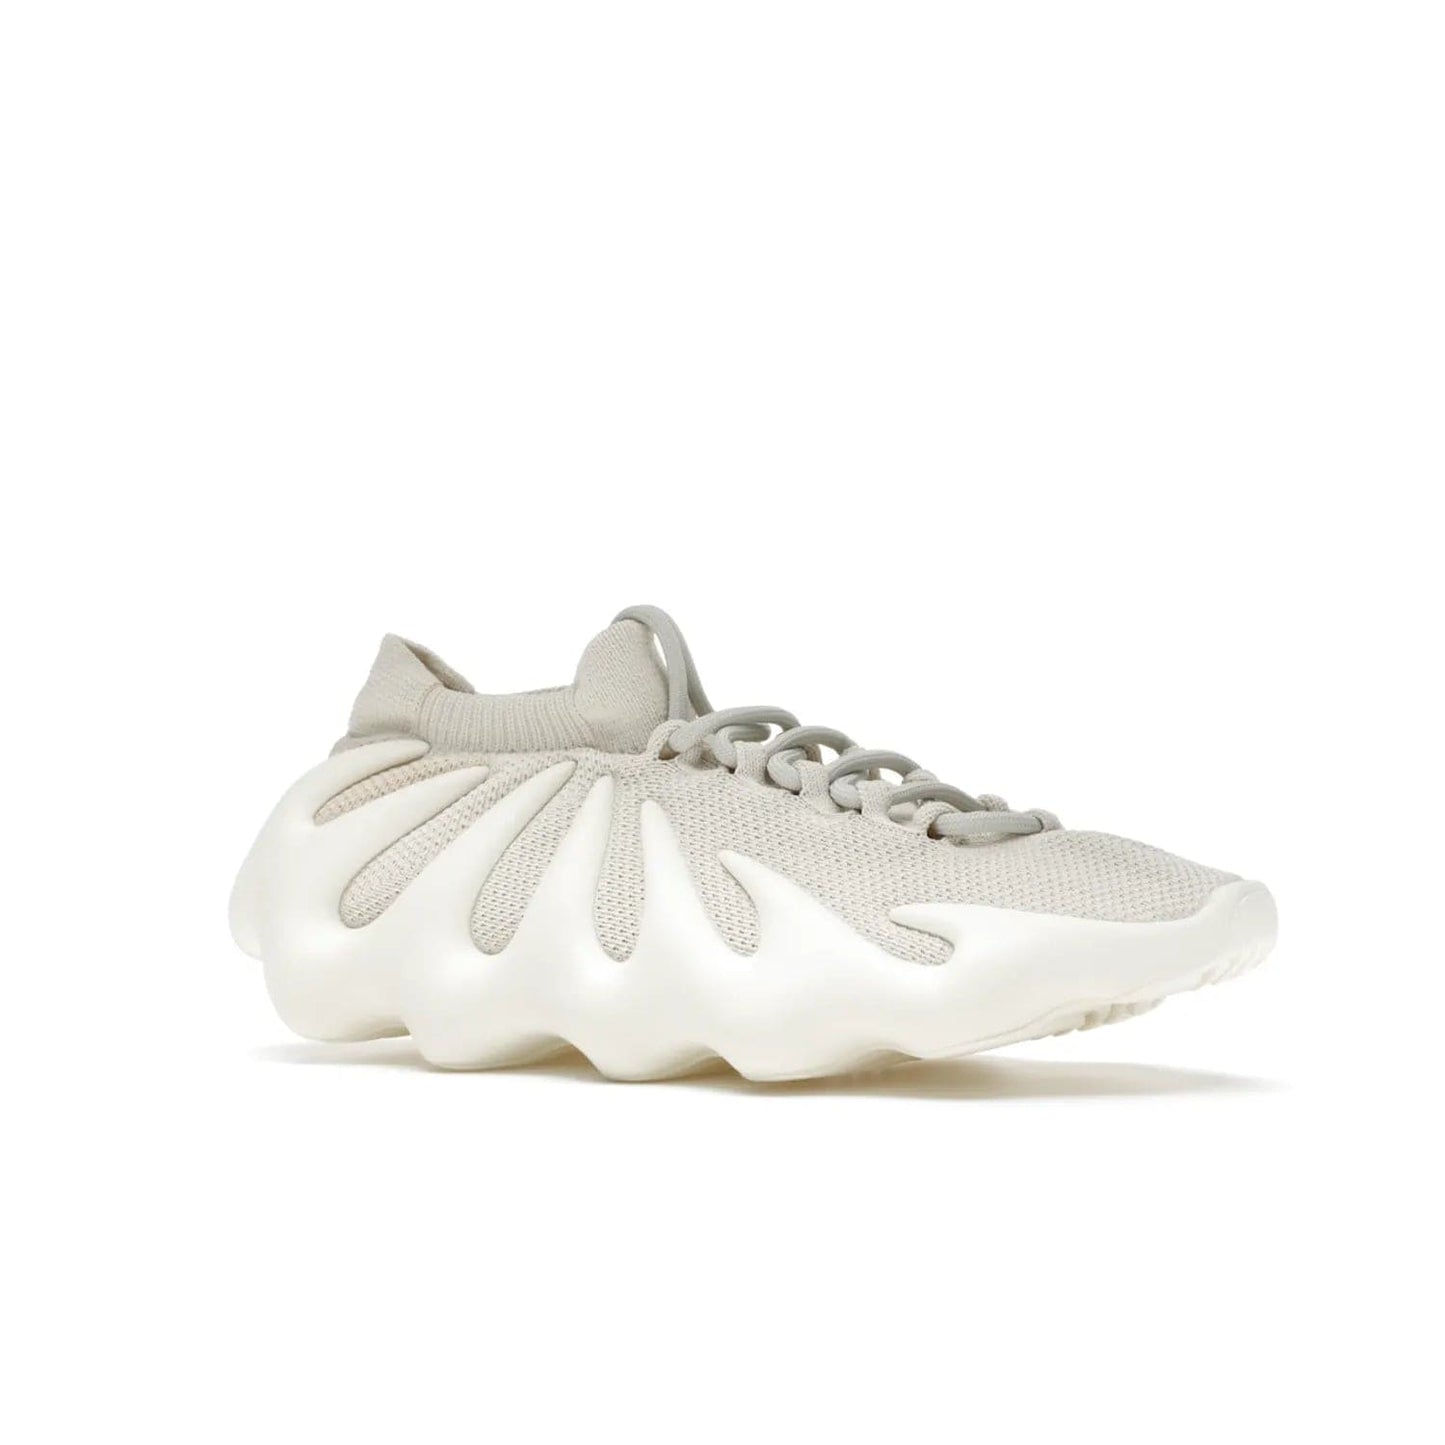 adidas Yeezy 450 Cloud White - Image 4 - Only at www.BallersClubKickz.com - Experience the future with the adidas Yeezy 450 Cloud White. A two-piece design featuring an extreme foam sole and mesh upper, this silhouette is expected to release in March 2021. Get your hands on this striking Cloud White/Cloud White colorway and stand out in the crowd.